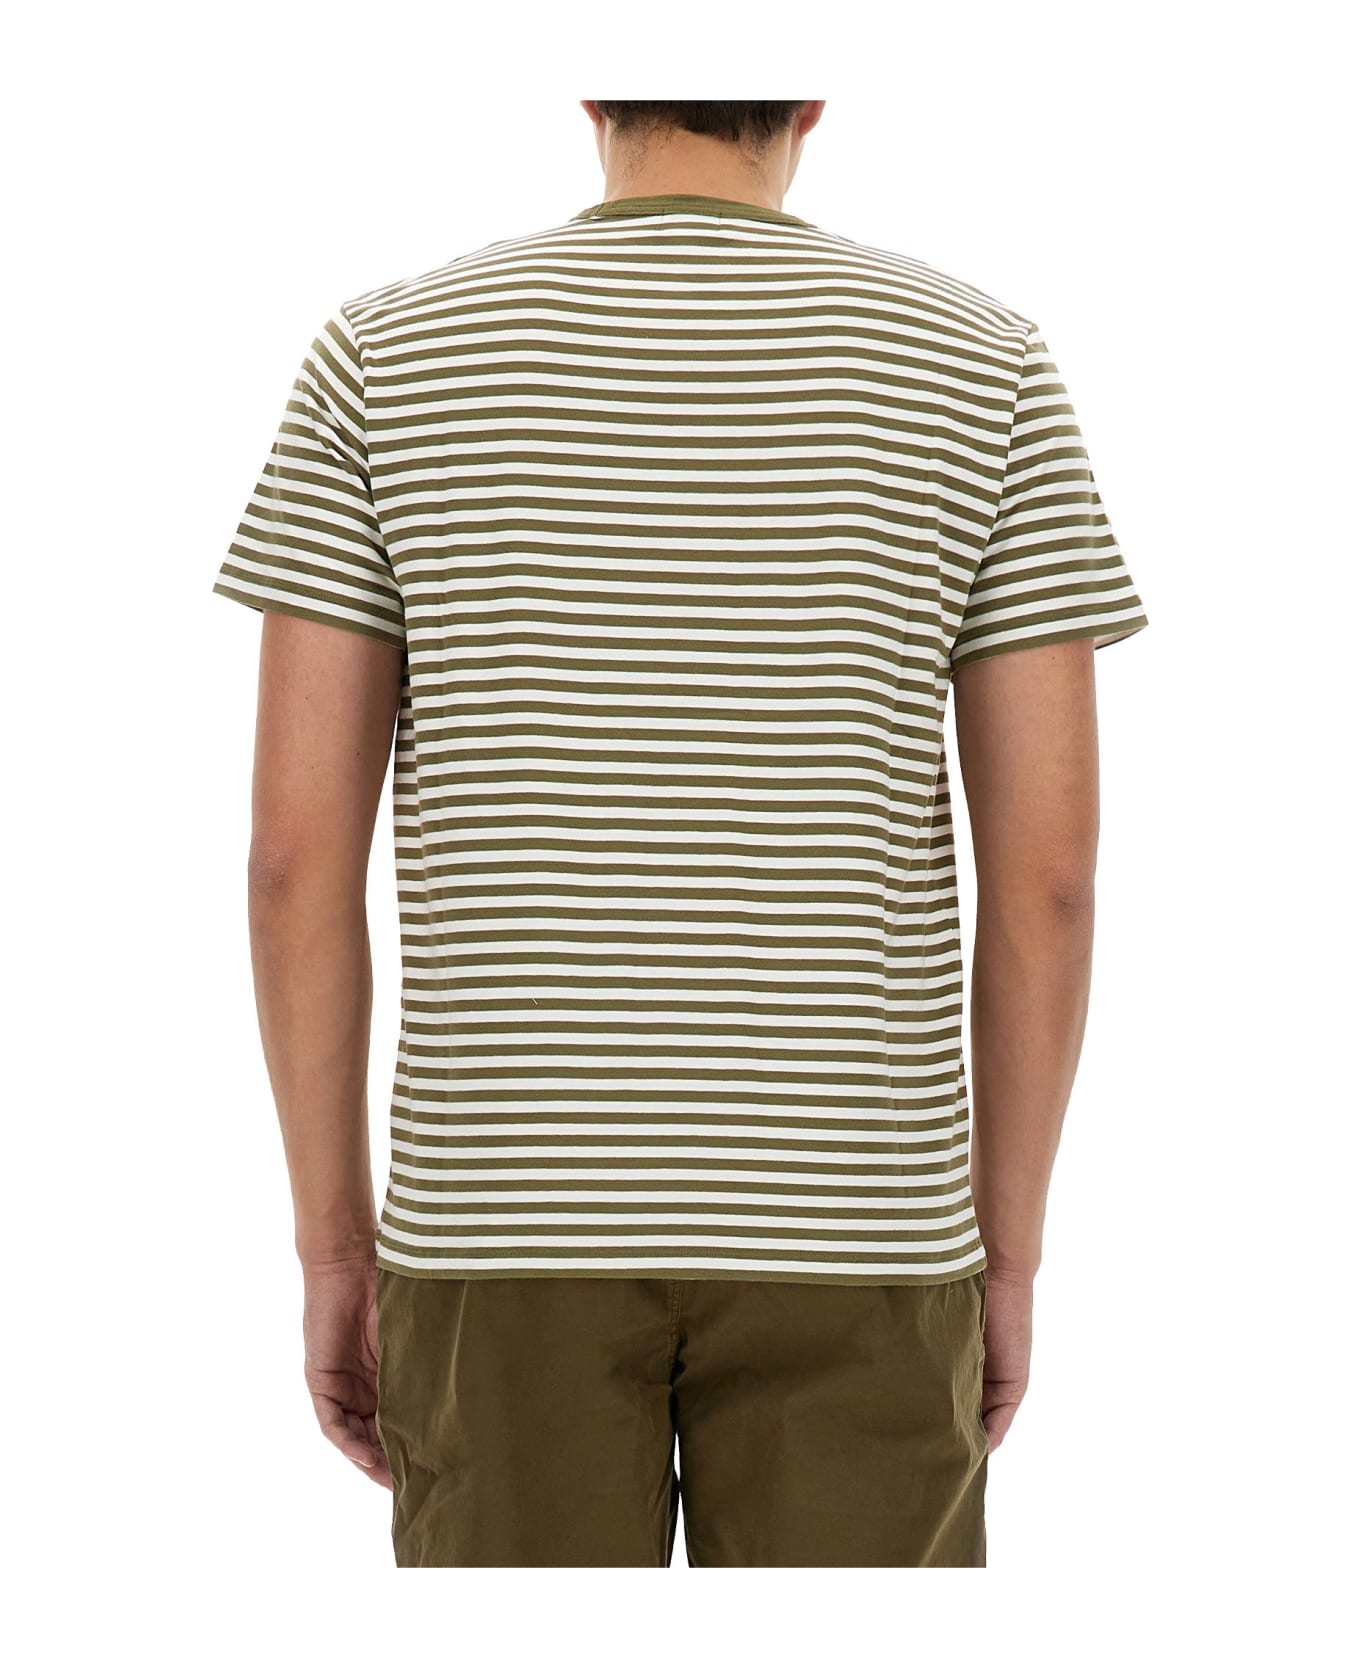 Woolrich Striped T-shirt - Military